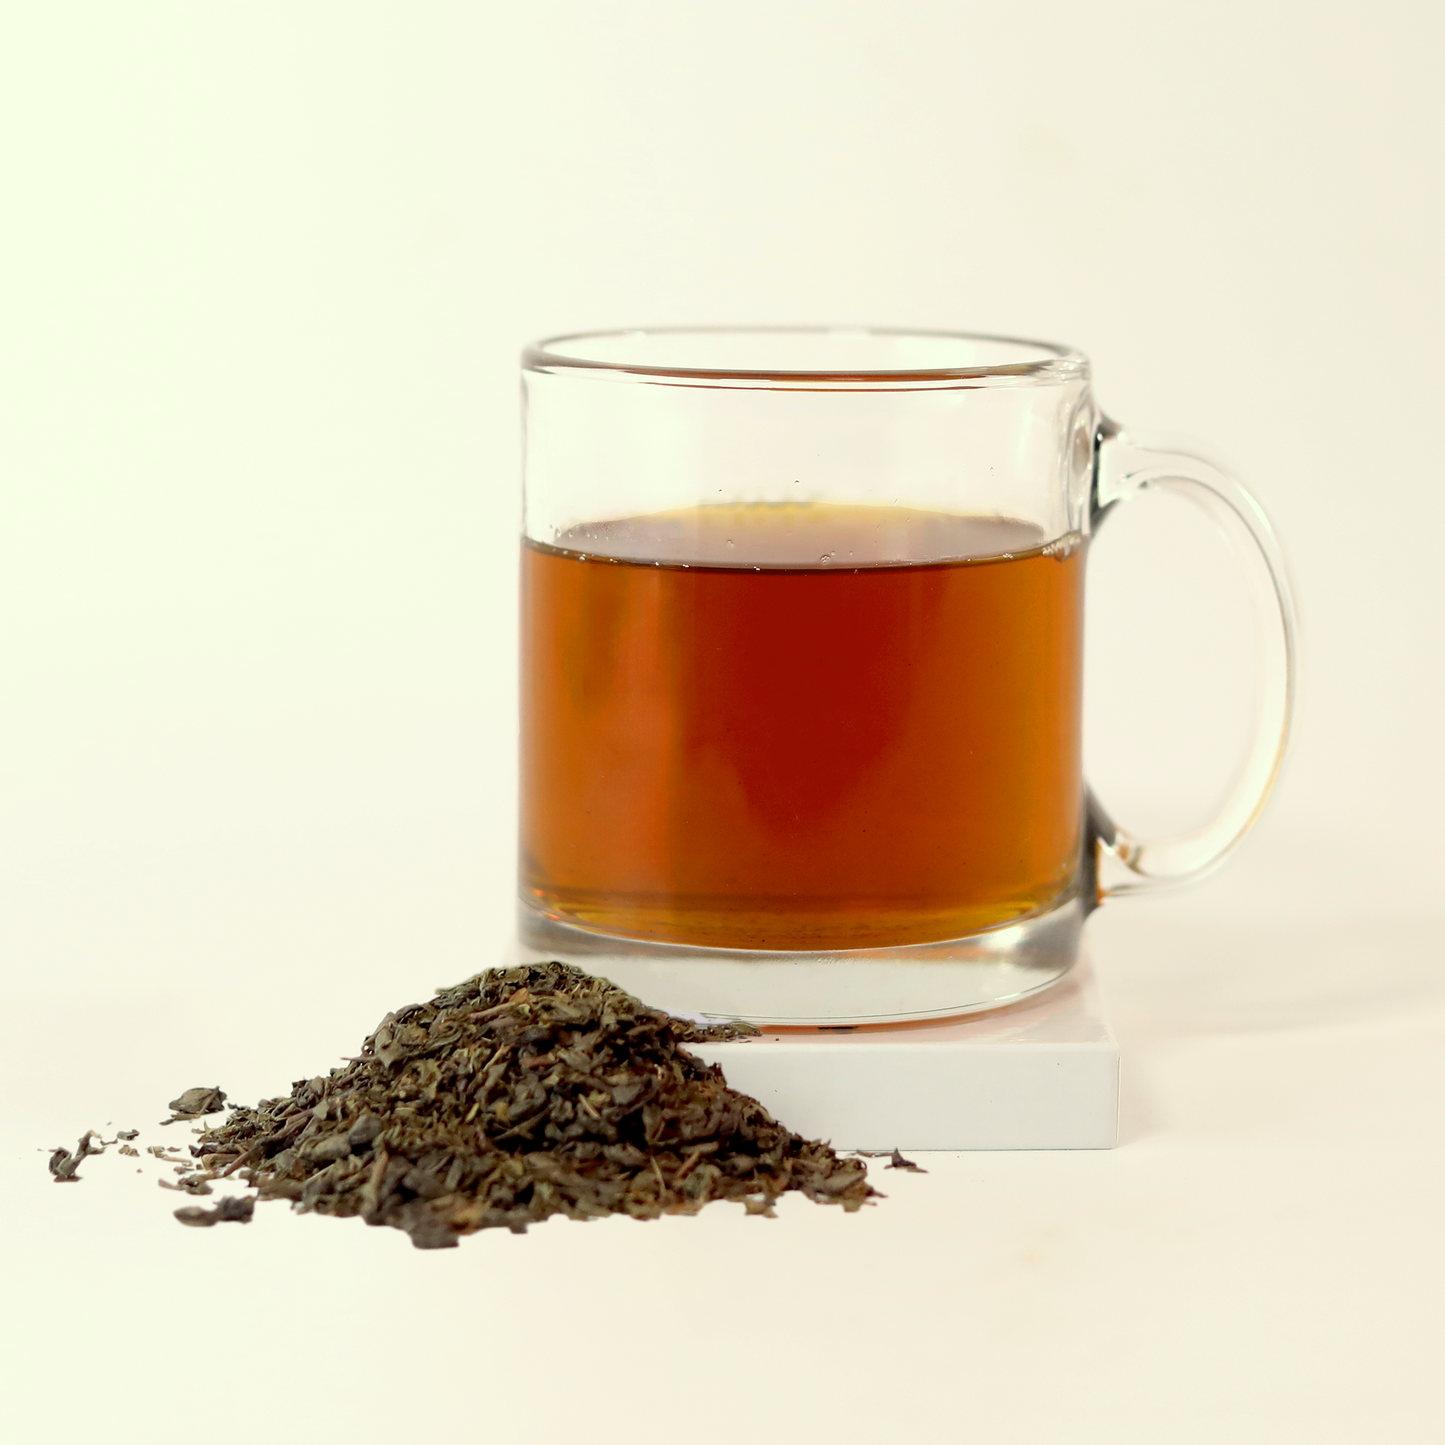  A clear glass mug filled with orange-brown tea - Moonlit Mint -  next to a small pile of dried tea leaves. A Good Store product.